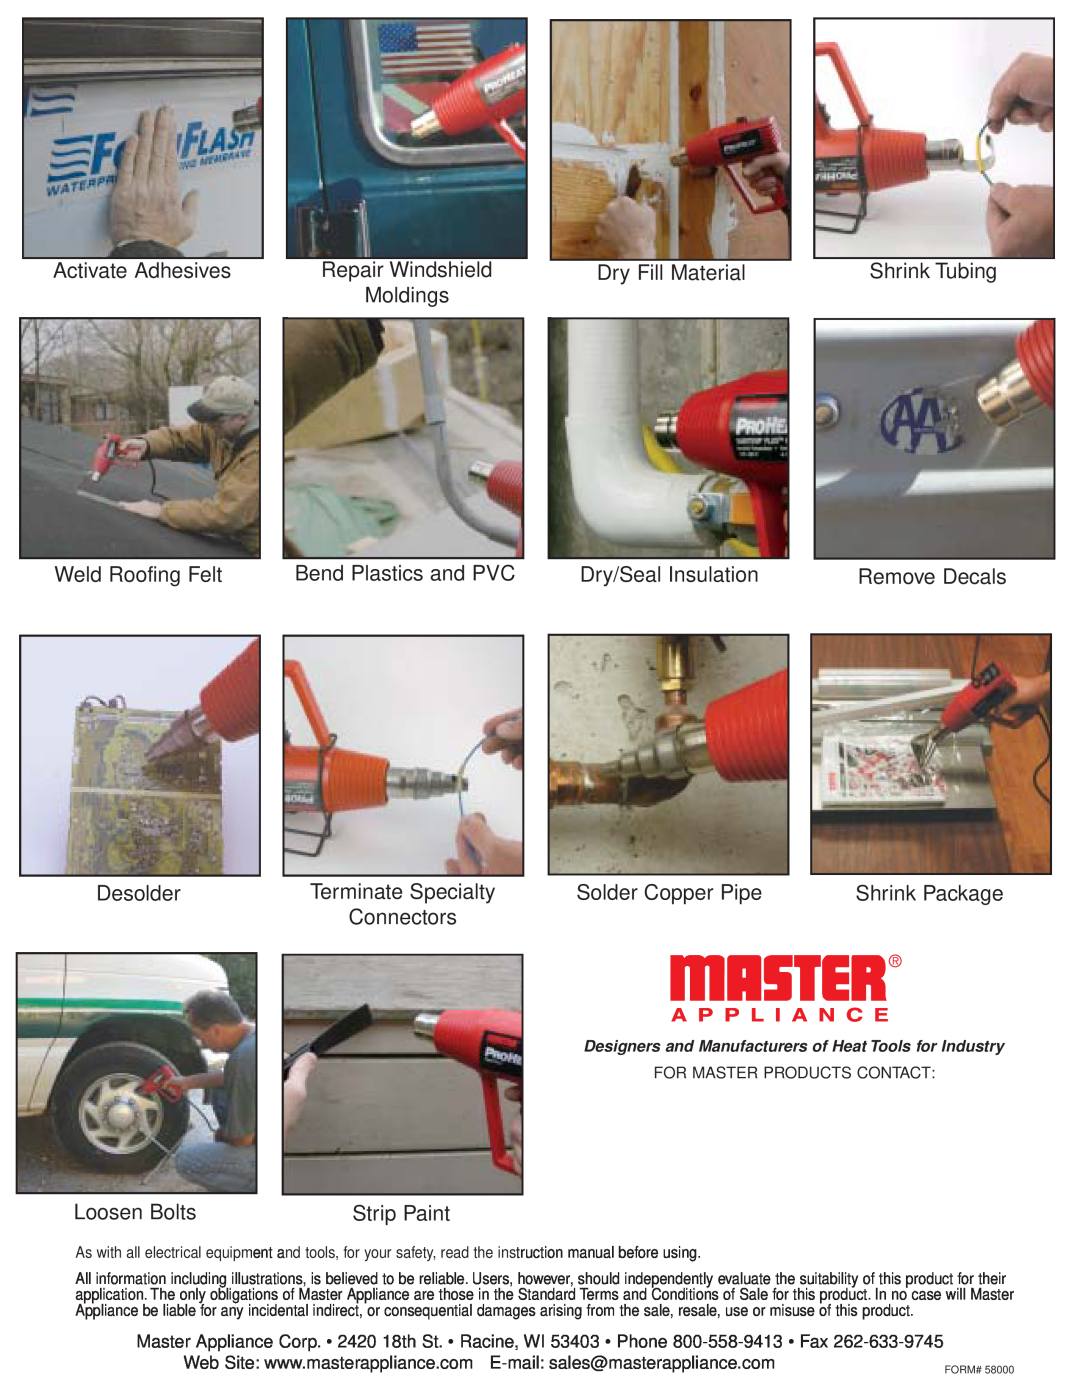 Master Appliance PH-1200-1, PH-1200K Designers and Manufacturers of Heat Tools for Industry, For Master Products Contact 